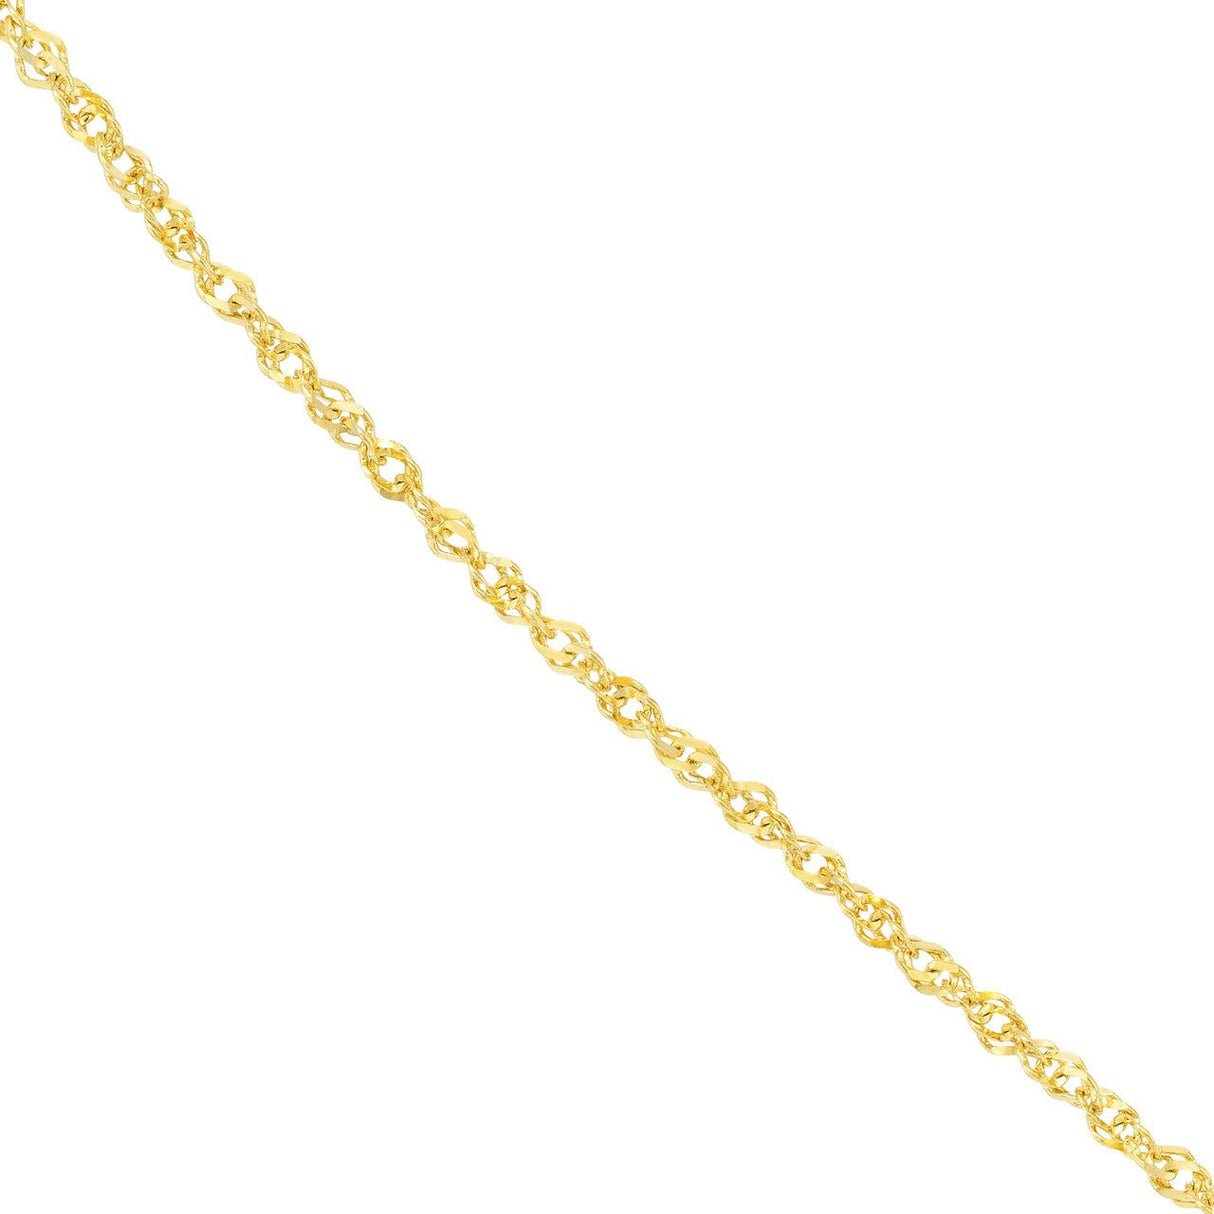 The 14K Gold Sparkle Singapore Chain paired with other gold layered necklaces, illustrating its potential for creating a sophisticated and dynamic look, diamond origin,